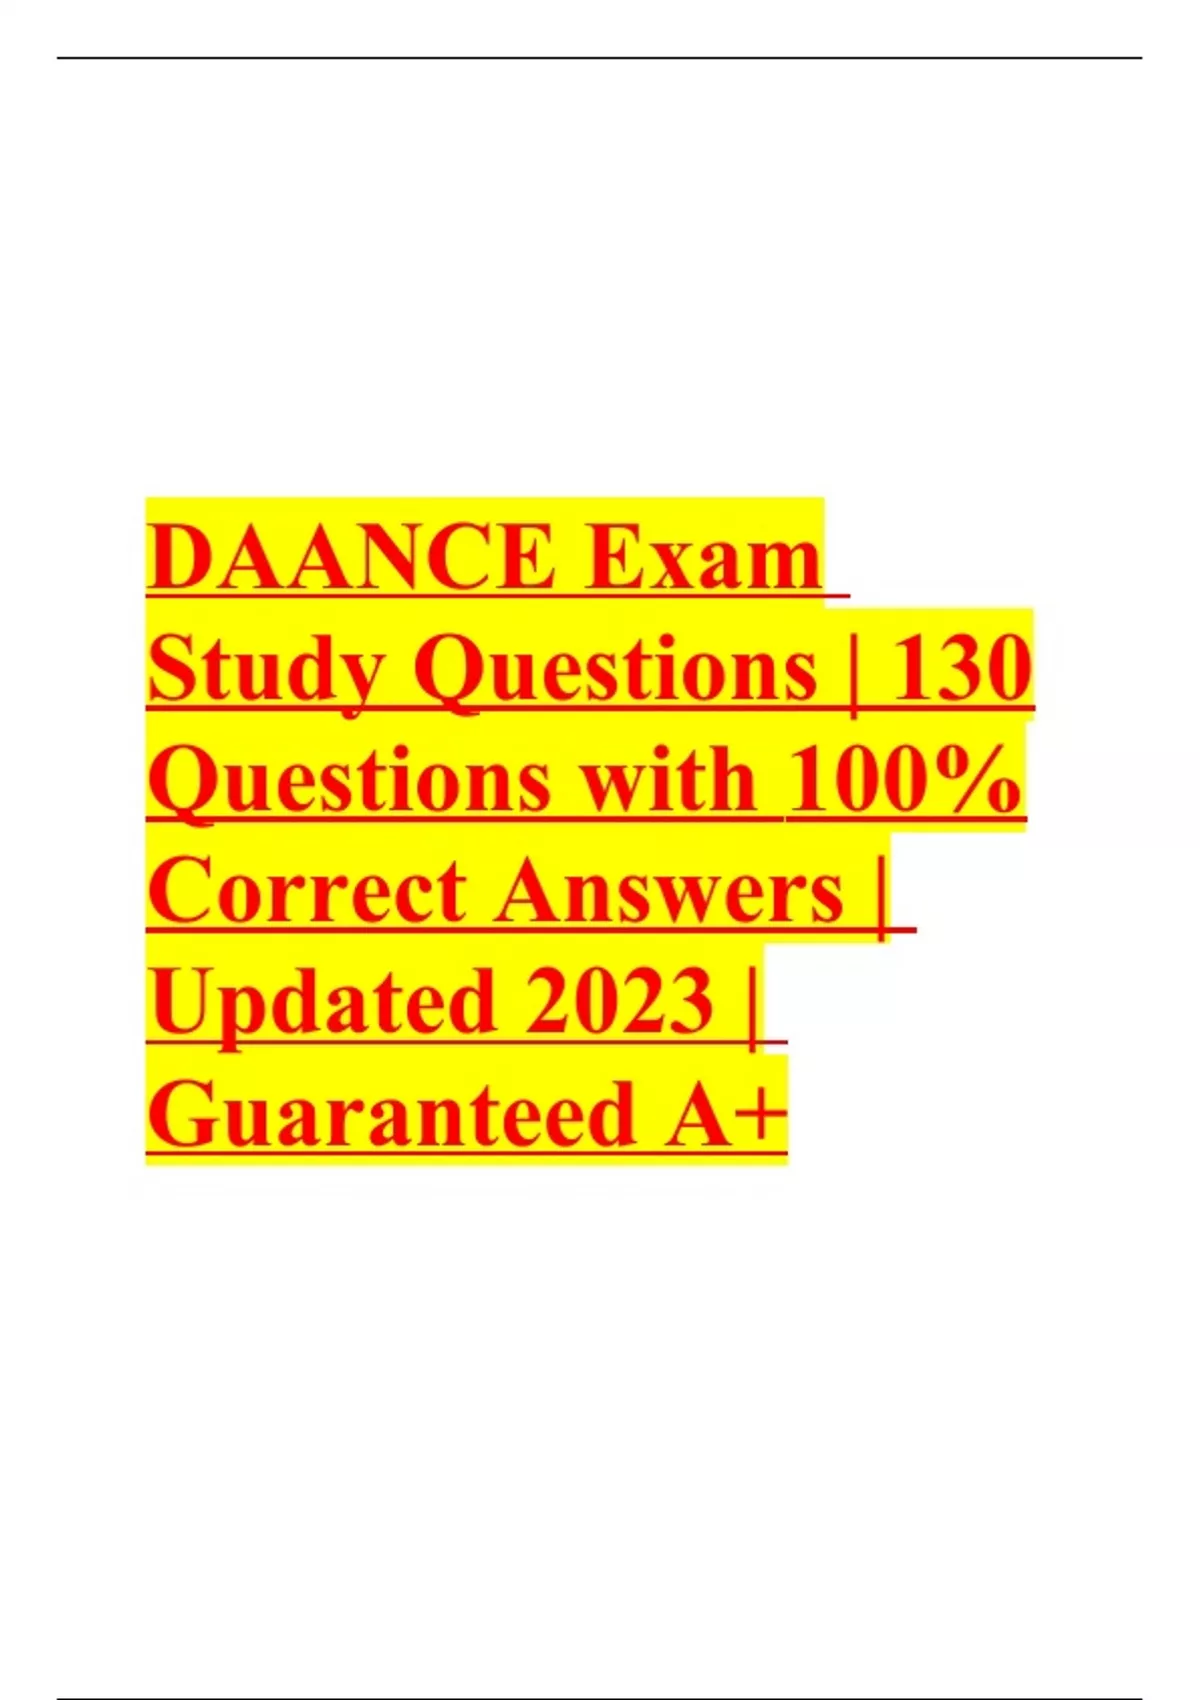 DAANCE Exam Study Questions 130 Questions with 100% Correct Answers